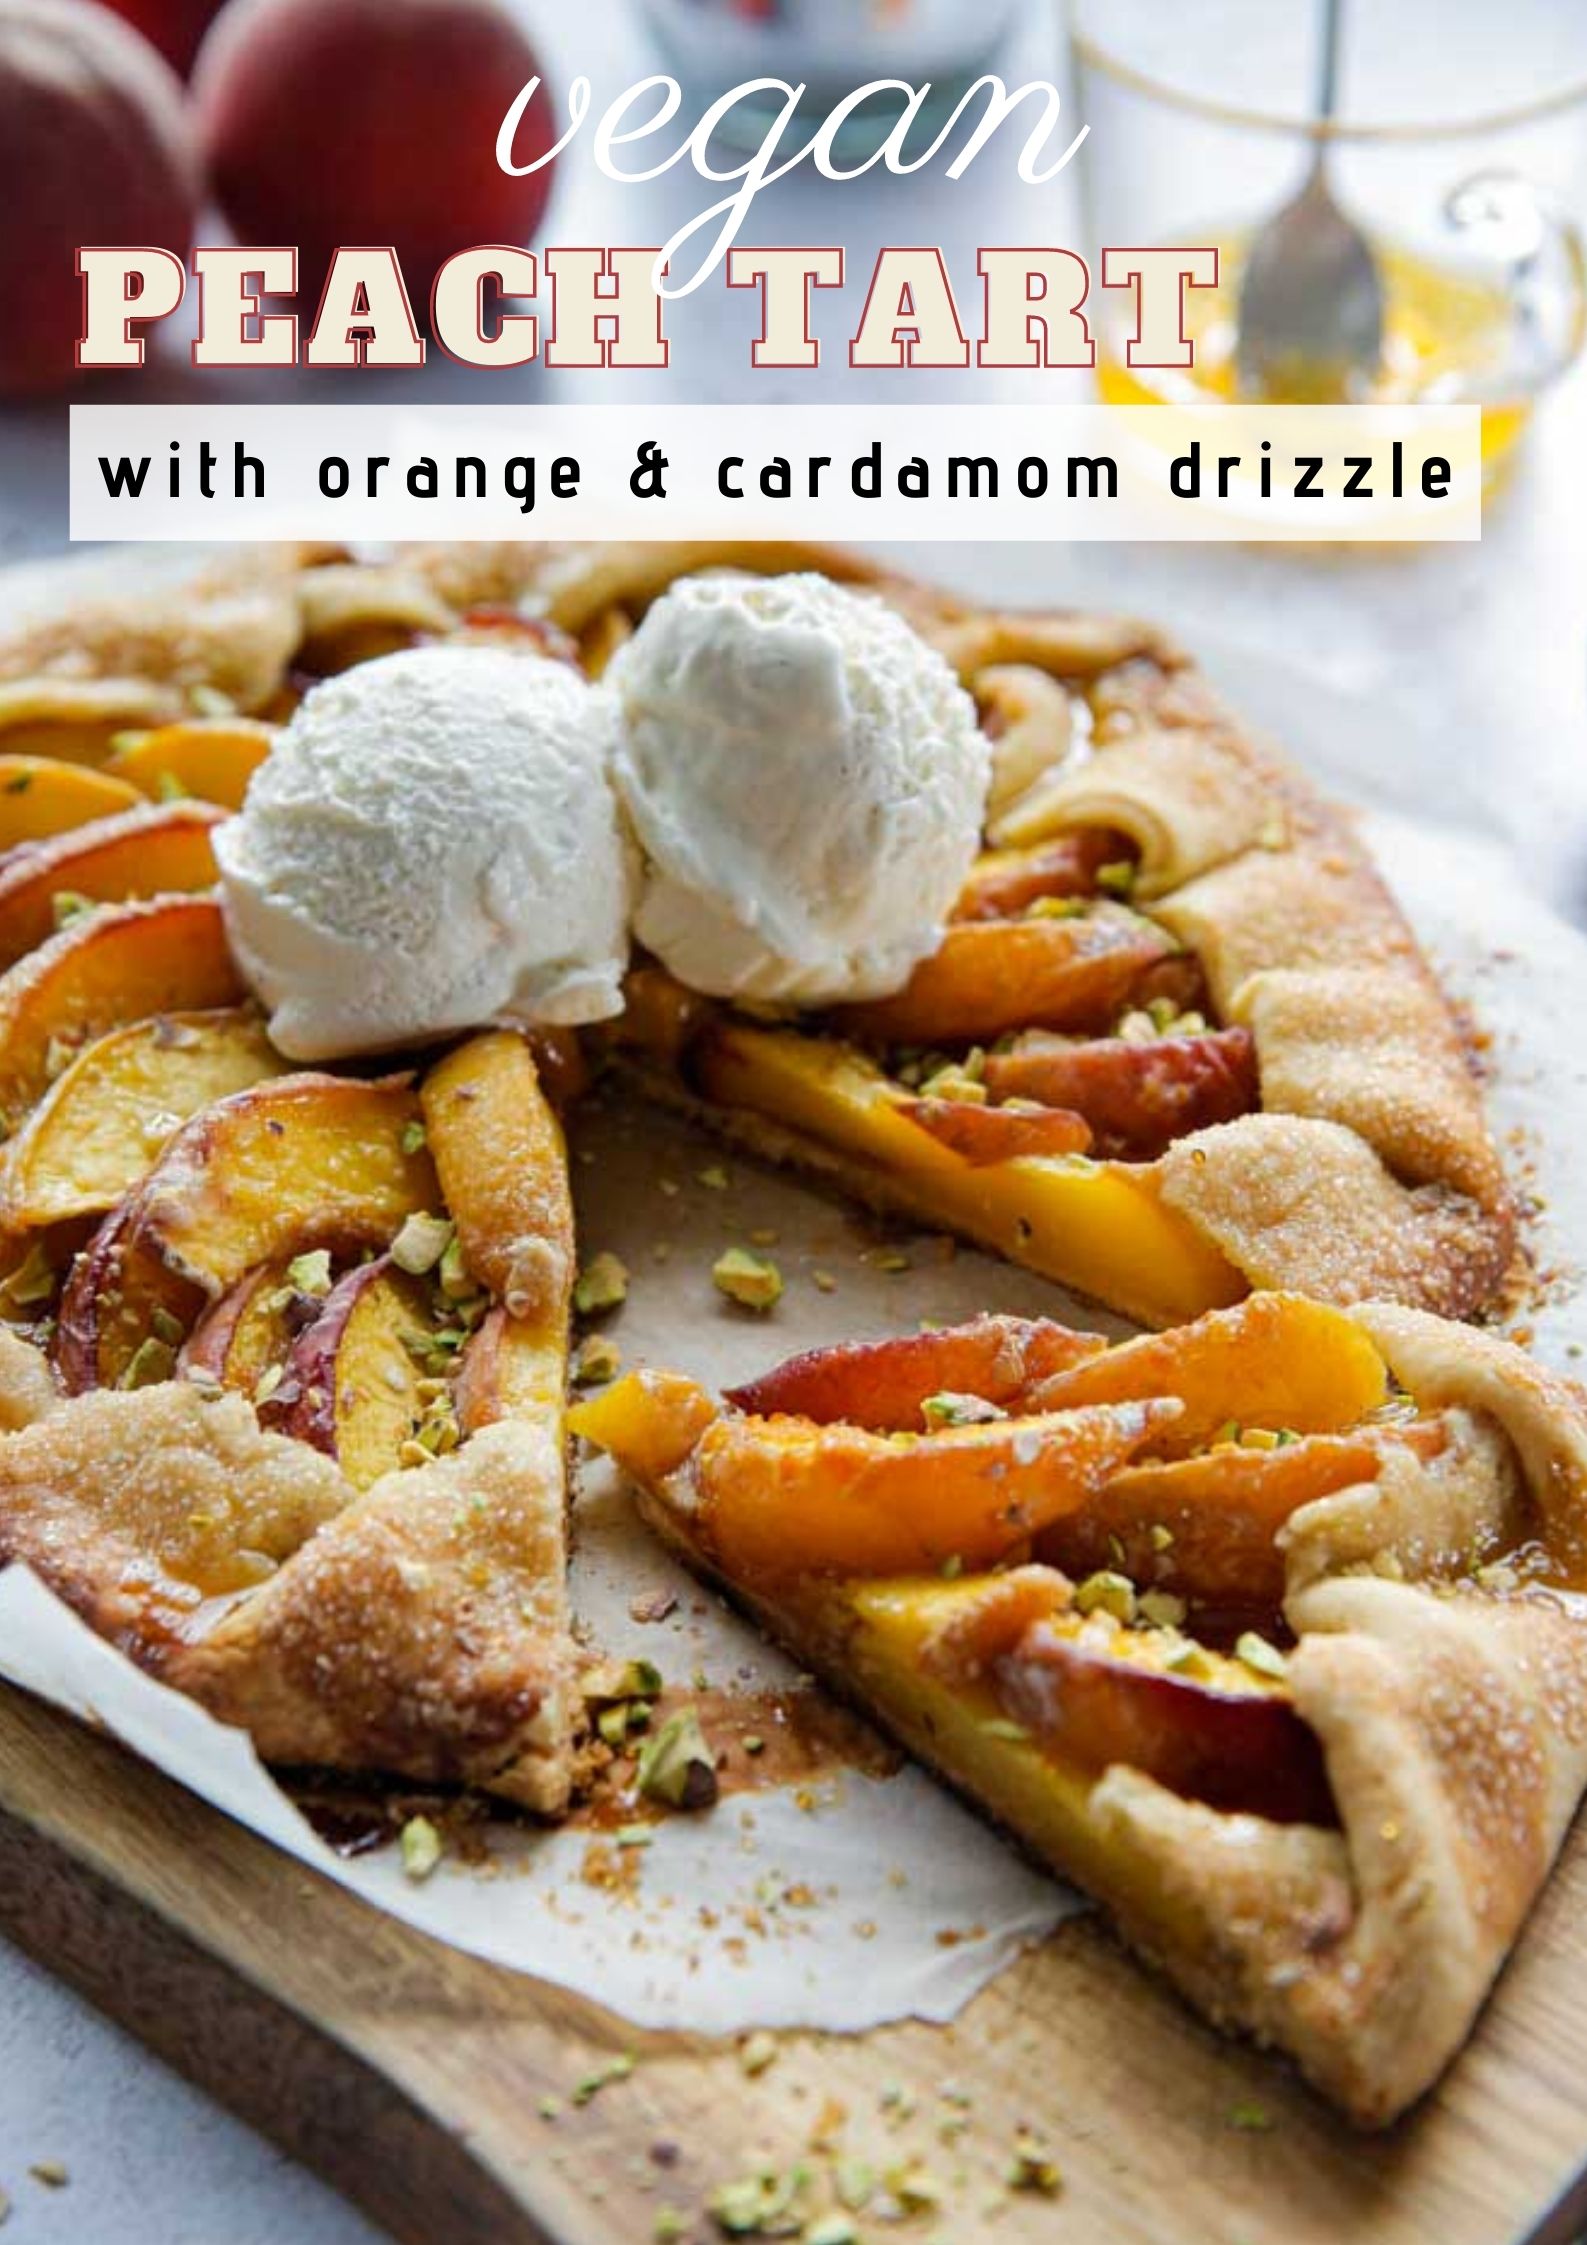 This easy, vegan peach tart is summer in every bite! Super simple homemade pastry brimming with fresh, juicy peaches served warm with a sweet orange and cardamom drizzle | recipe on thecookandhim.com | #vegan #vegandessert #peachtart #summertart #peaches #veganbaking #veganrecipe #veganpastry